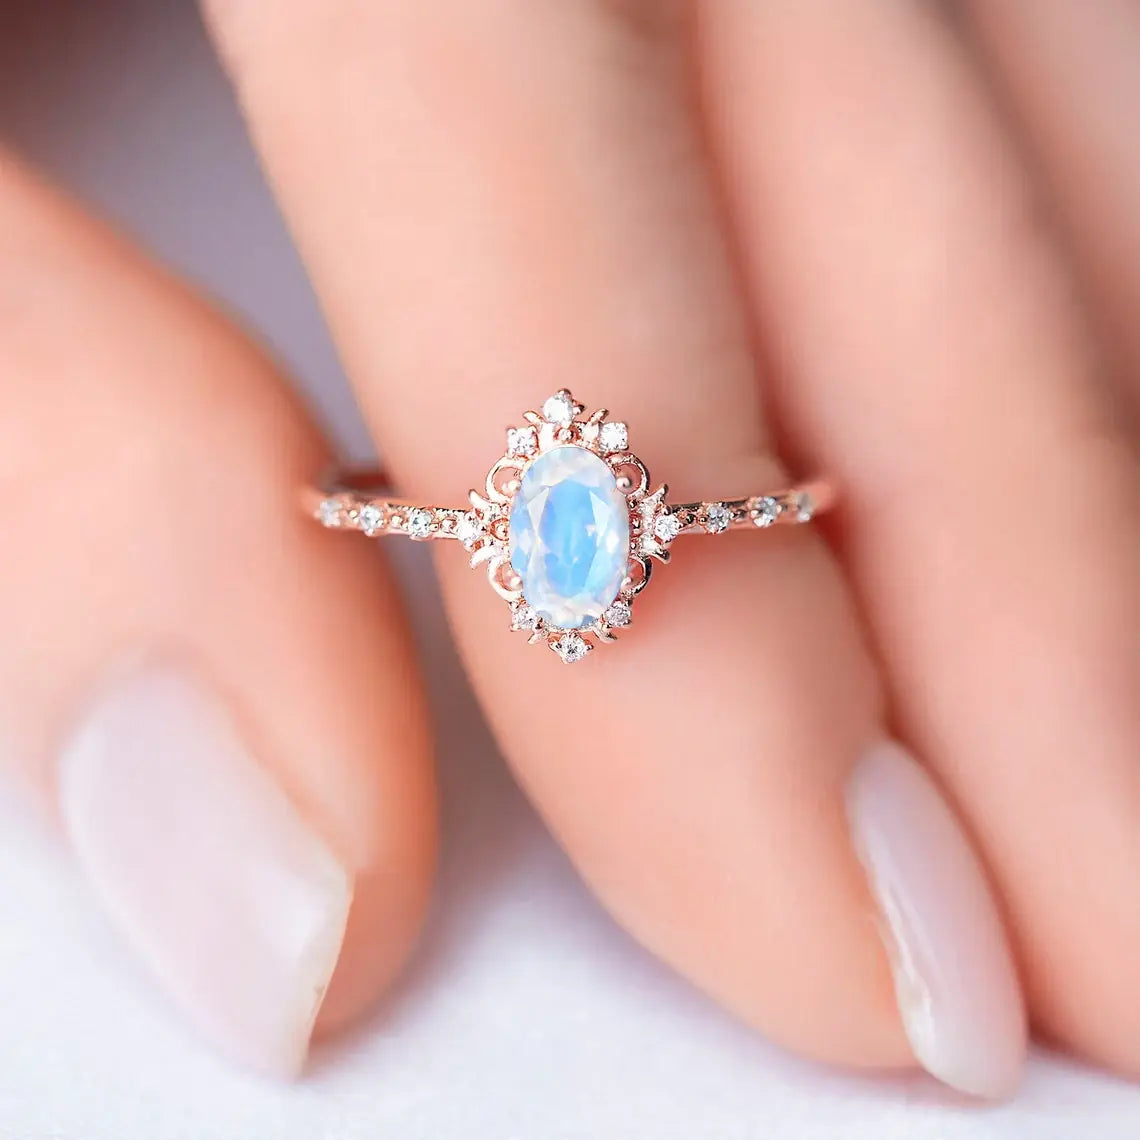 Vintage Moonstone ring on a woman's finger